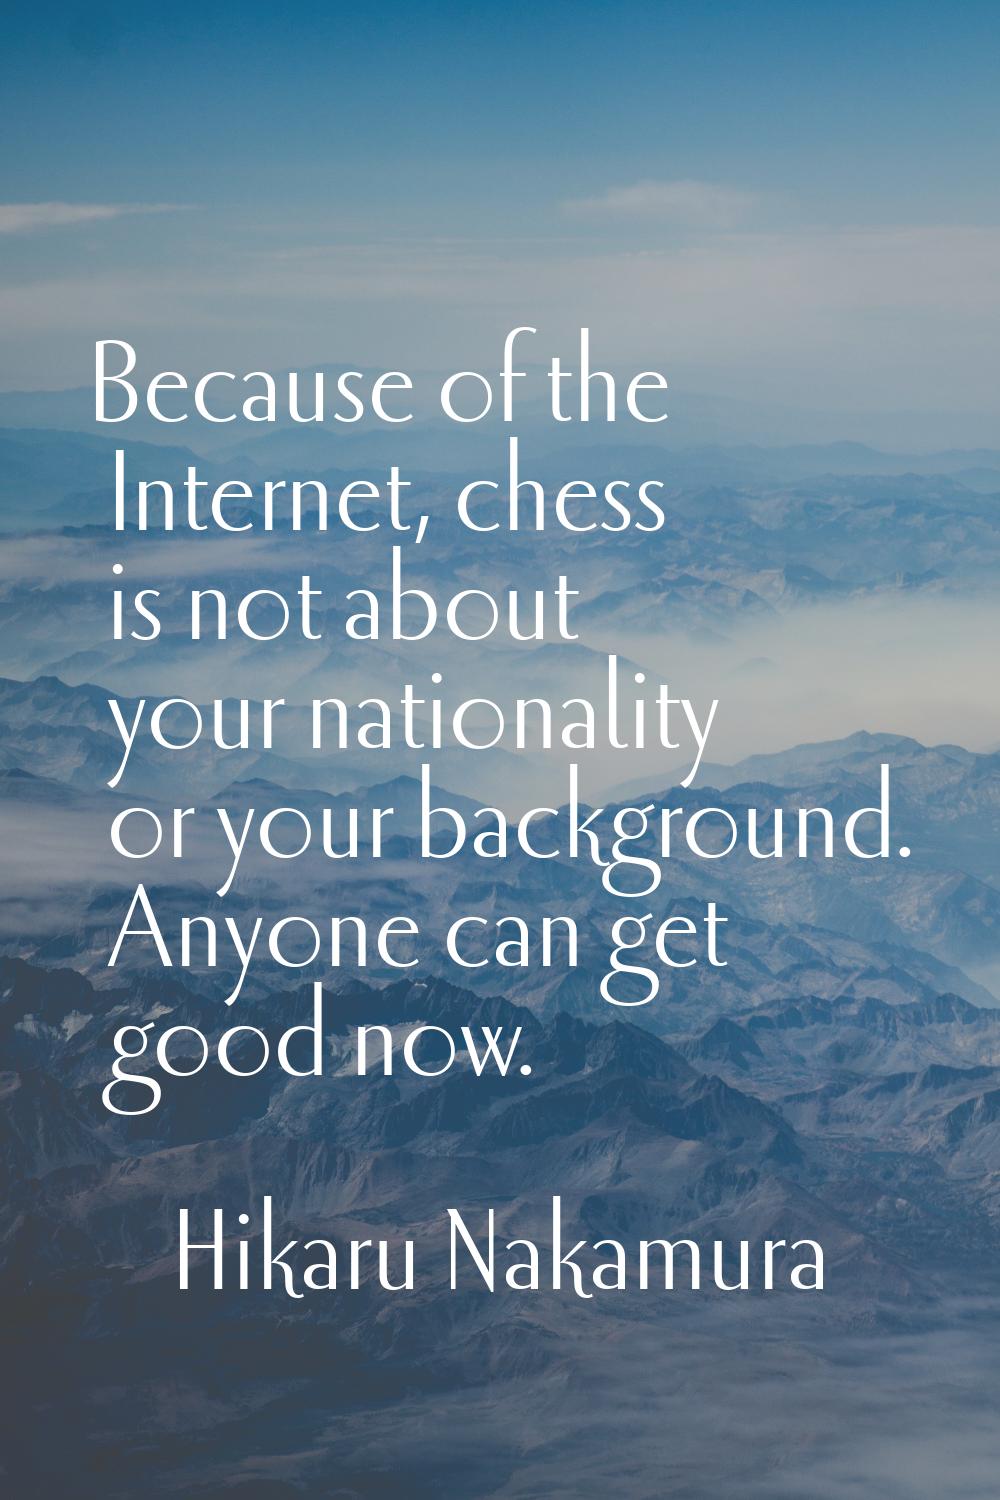 Because of the Internet, chess is not about your nationality or your background. Anyone can get goo